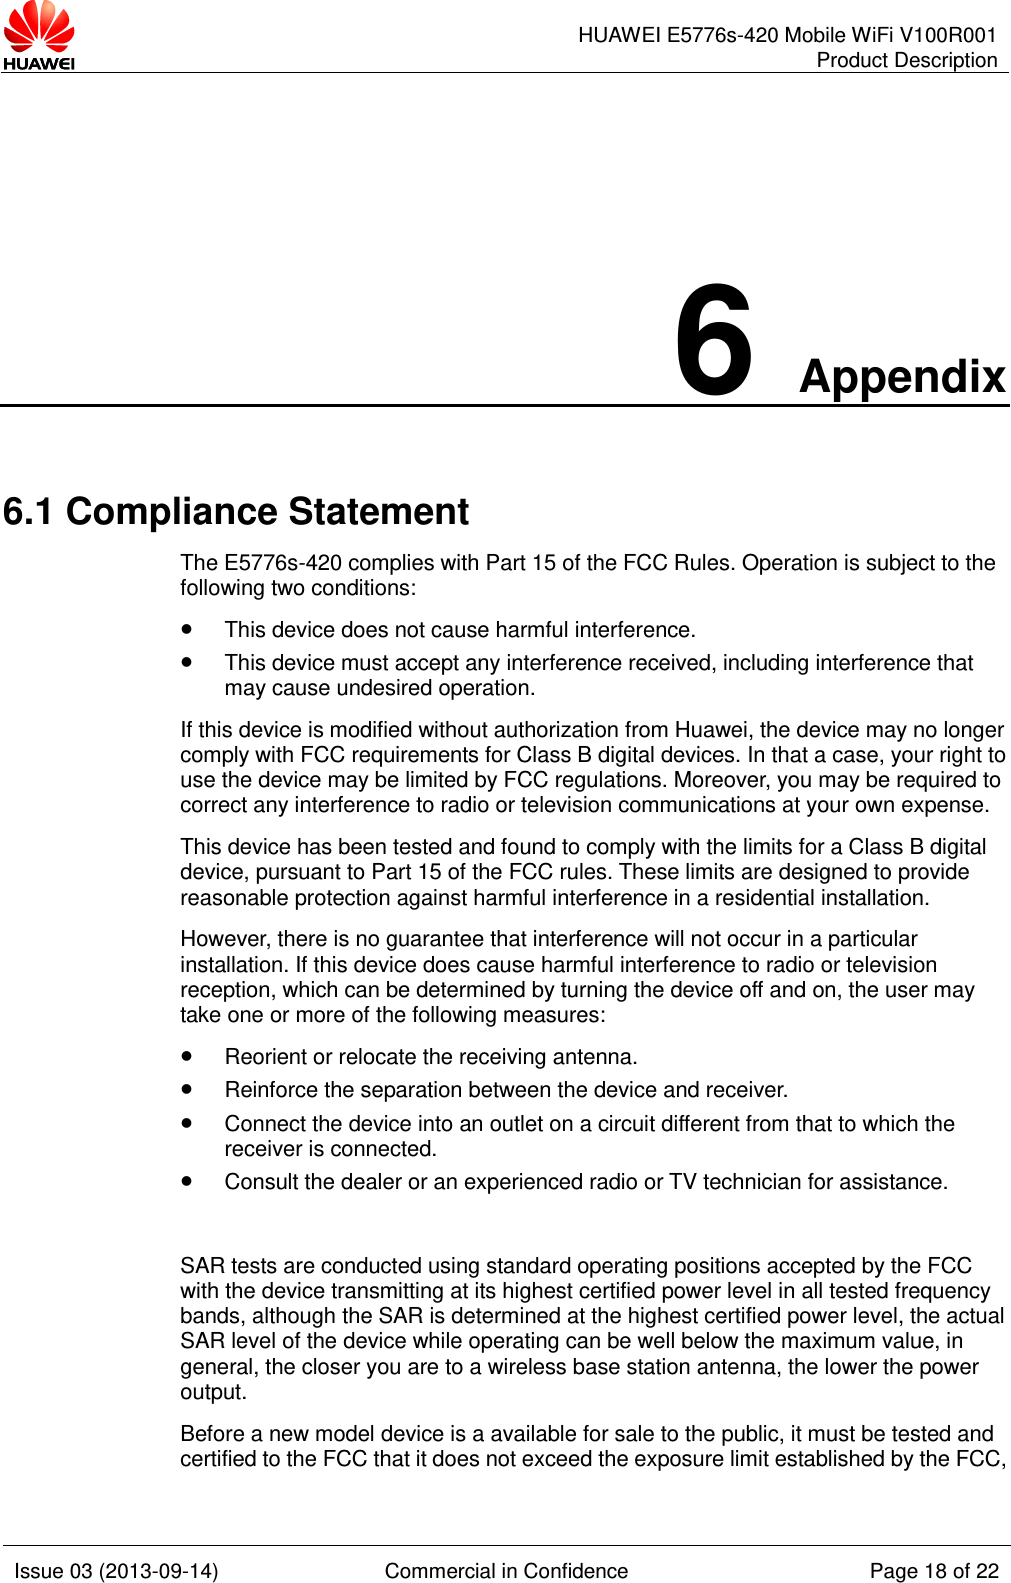      HUAWEI E5776s-420 Mobile WiFi V100R001 Product Description    Issue 03 (2013-09-14) Commercial in Confidence Page 18 of 22  6 Appendix 6.1 Compliance Statement The E5776s-420 complies with Part 15 of the FCC Rules. Operation is subject to the following two conditions:  This device does not cause harmful interference.  This device must accept any interference received, including interference that may cause undesired operation. If this device is modified without authorization from Huawei, the device may no longer comply with FCC requirements for Class B digital devices. In that a case, your right to use the device may be limited by FCC regulations. Moreover, you may be required to correct any interference to radio or television communications at your own expense. This device has been tested and found to comply with the limits for a Class B digital device, pursuant to Part 15 of the FCC rules. These limits are designed to provide reasonable protection against harmful interference in a residential installation. However, there is no guarantee that interference will not occur in a particular installation. If this device does cause harmful interference to radio or television reception, which can be determined by turning the device off and on, the user may take one or more of the following measures:  Reorient or relocate the receiving antenna.  Reinforce the separation between the device and receiver.  Connect the device into an outlet on a circuit different from that to which the receiver is connected.  Consult the dealer or an experienced radio or TV technician for assistance.  SAR tests are conducted using standard operating positions accepted by the FCC with the device transmitting at its highest certified power level in all tested frequency bands, although the SAR is determined at the highest certified power level, the actual SAR level of the device while operating can be well below the maximum value, in general, the closer you are to a wireless base station antenna, the lower the power output. Before a new model device is a available for sale to the public, it must be tested and certified to the FCC that it does not exceed the exposure limit established by the FCC, 